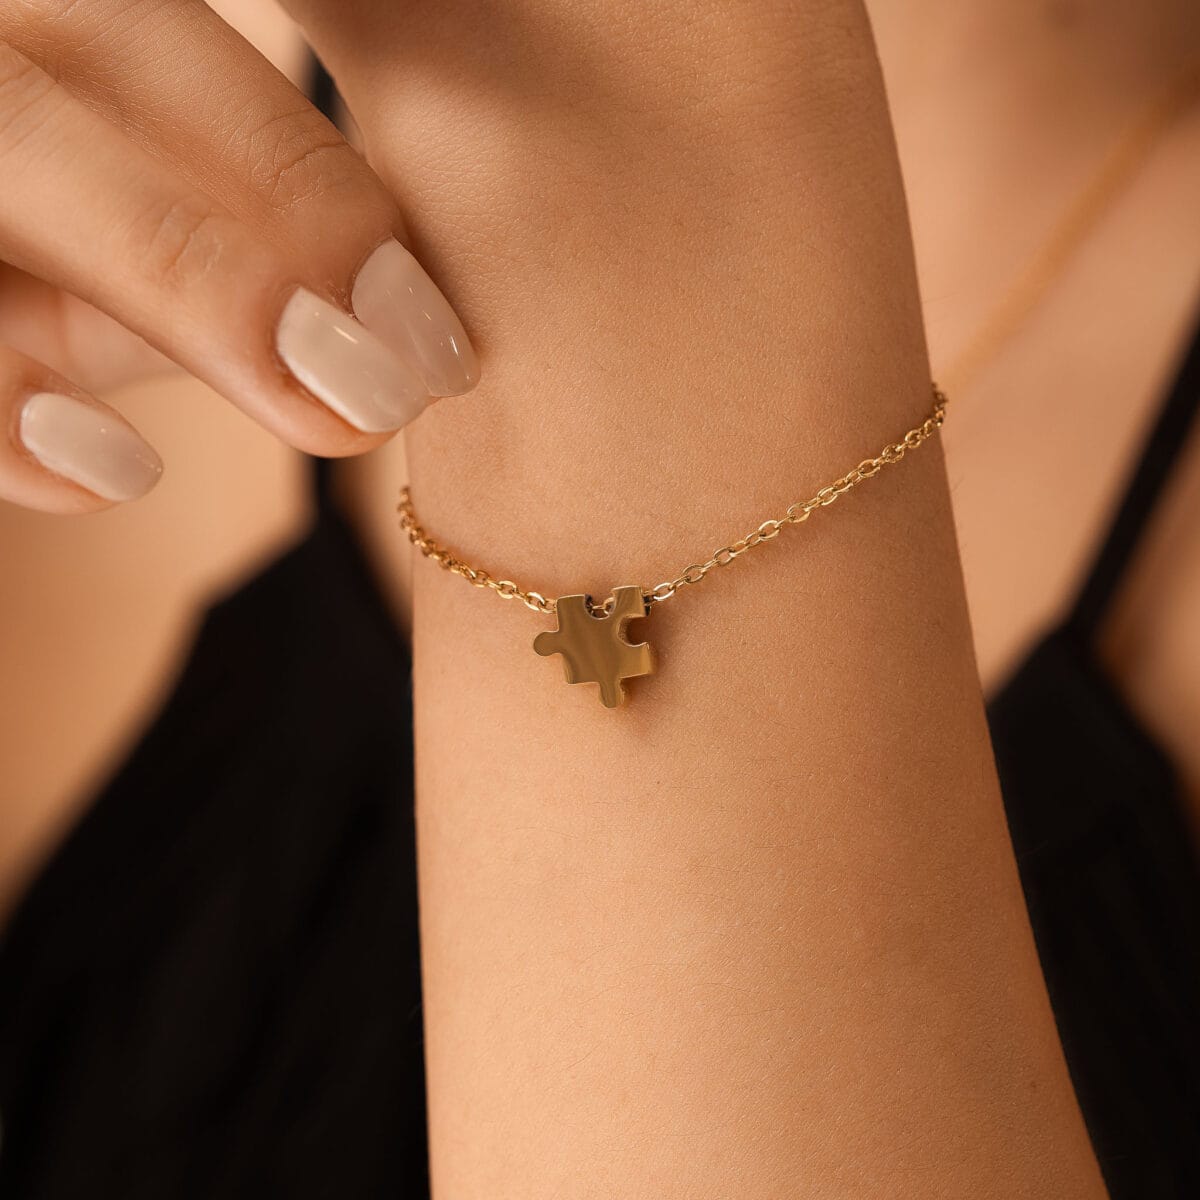 https://m.clubbella.co/product/duna-gold-puzzle-charm-bracelet/ Duna Puzzle Gold Charm Bracelet (8)